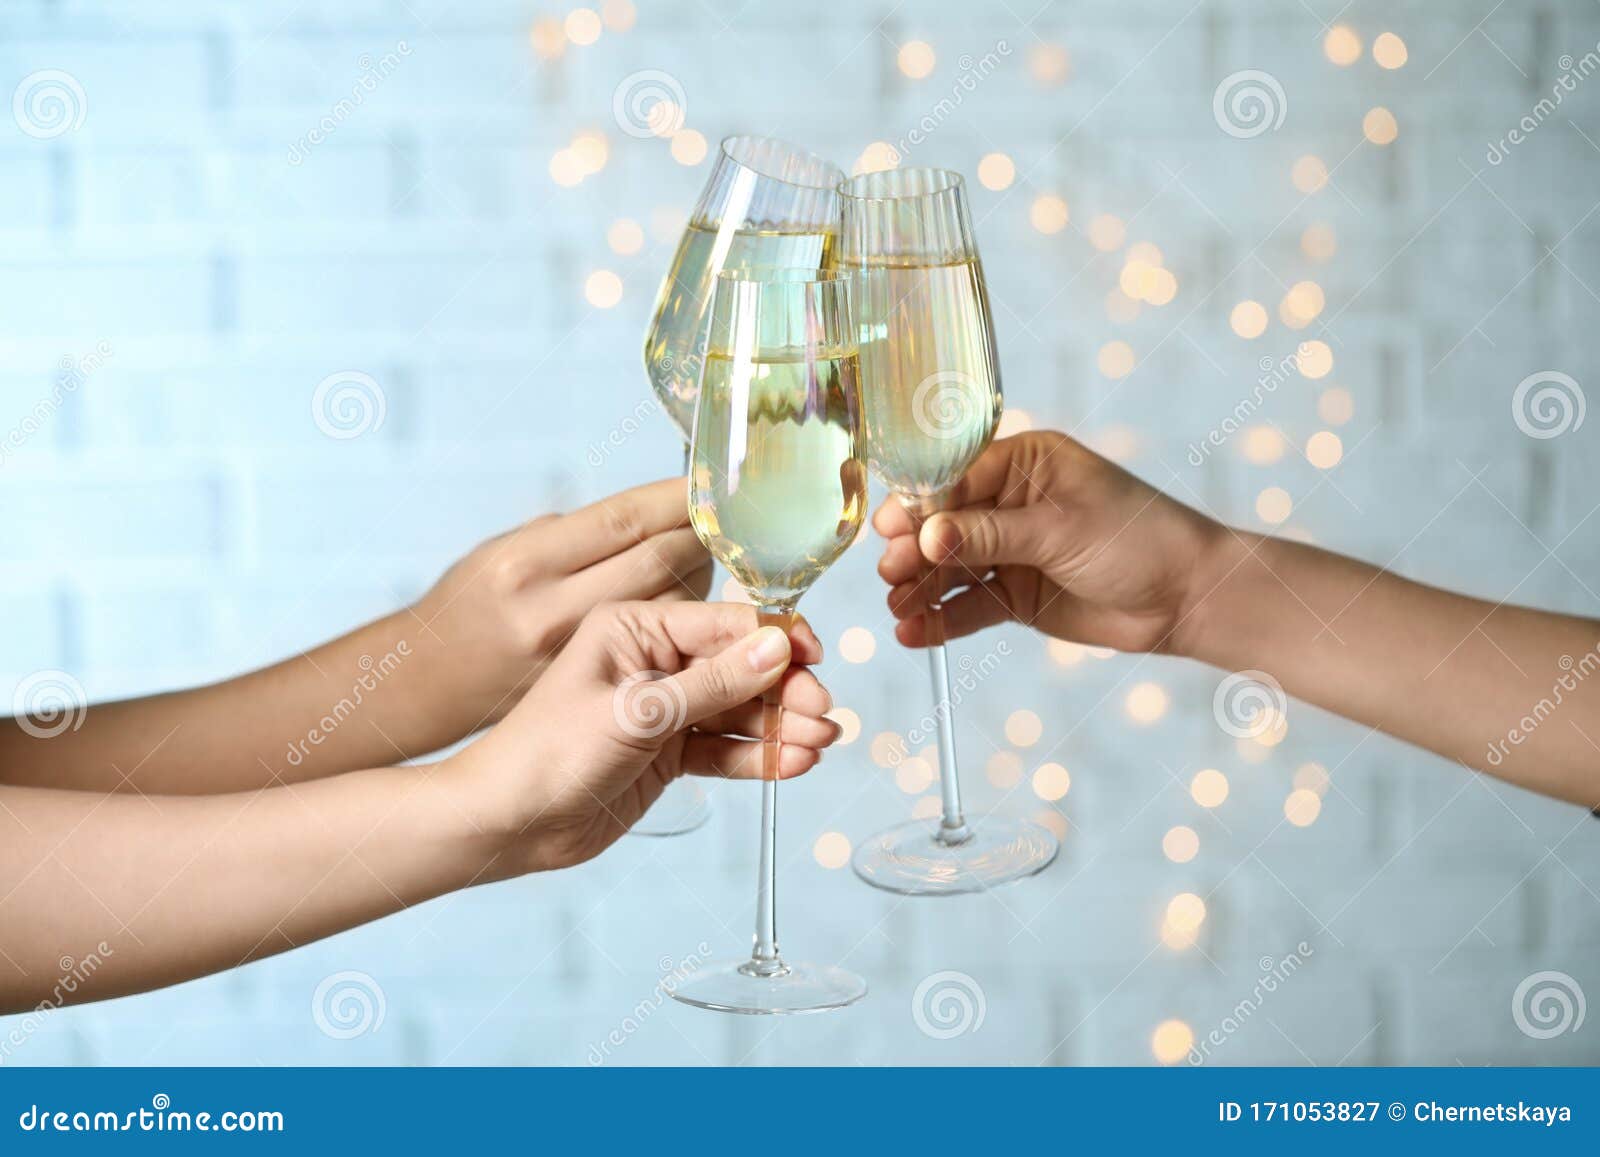 People Clinking Glasses Of Champagne Against Lights Closeup Stock Image Image Of Goblet